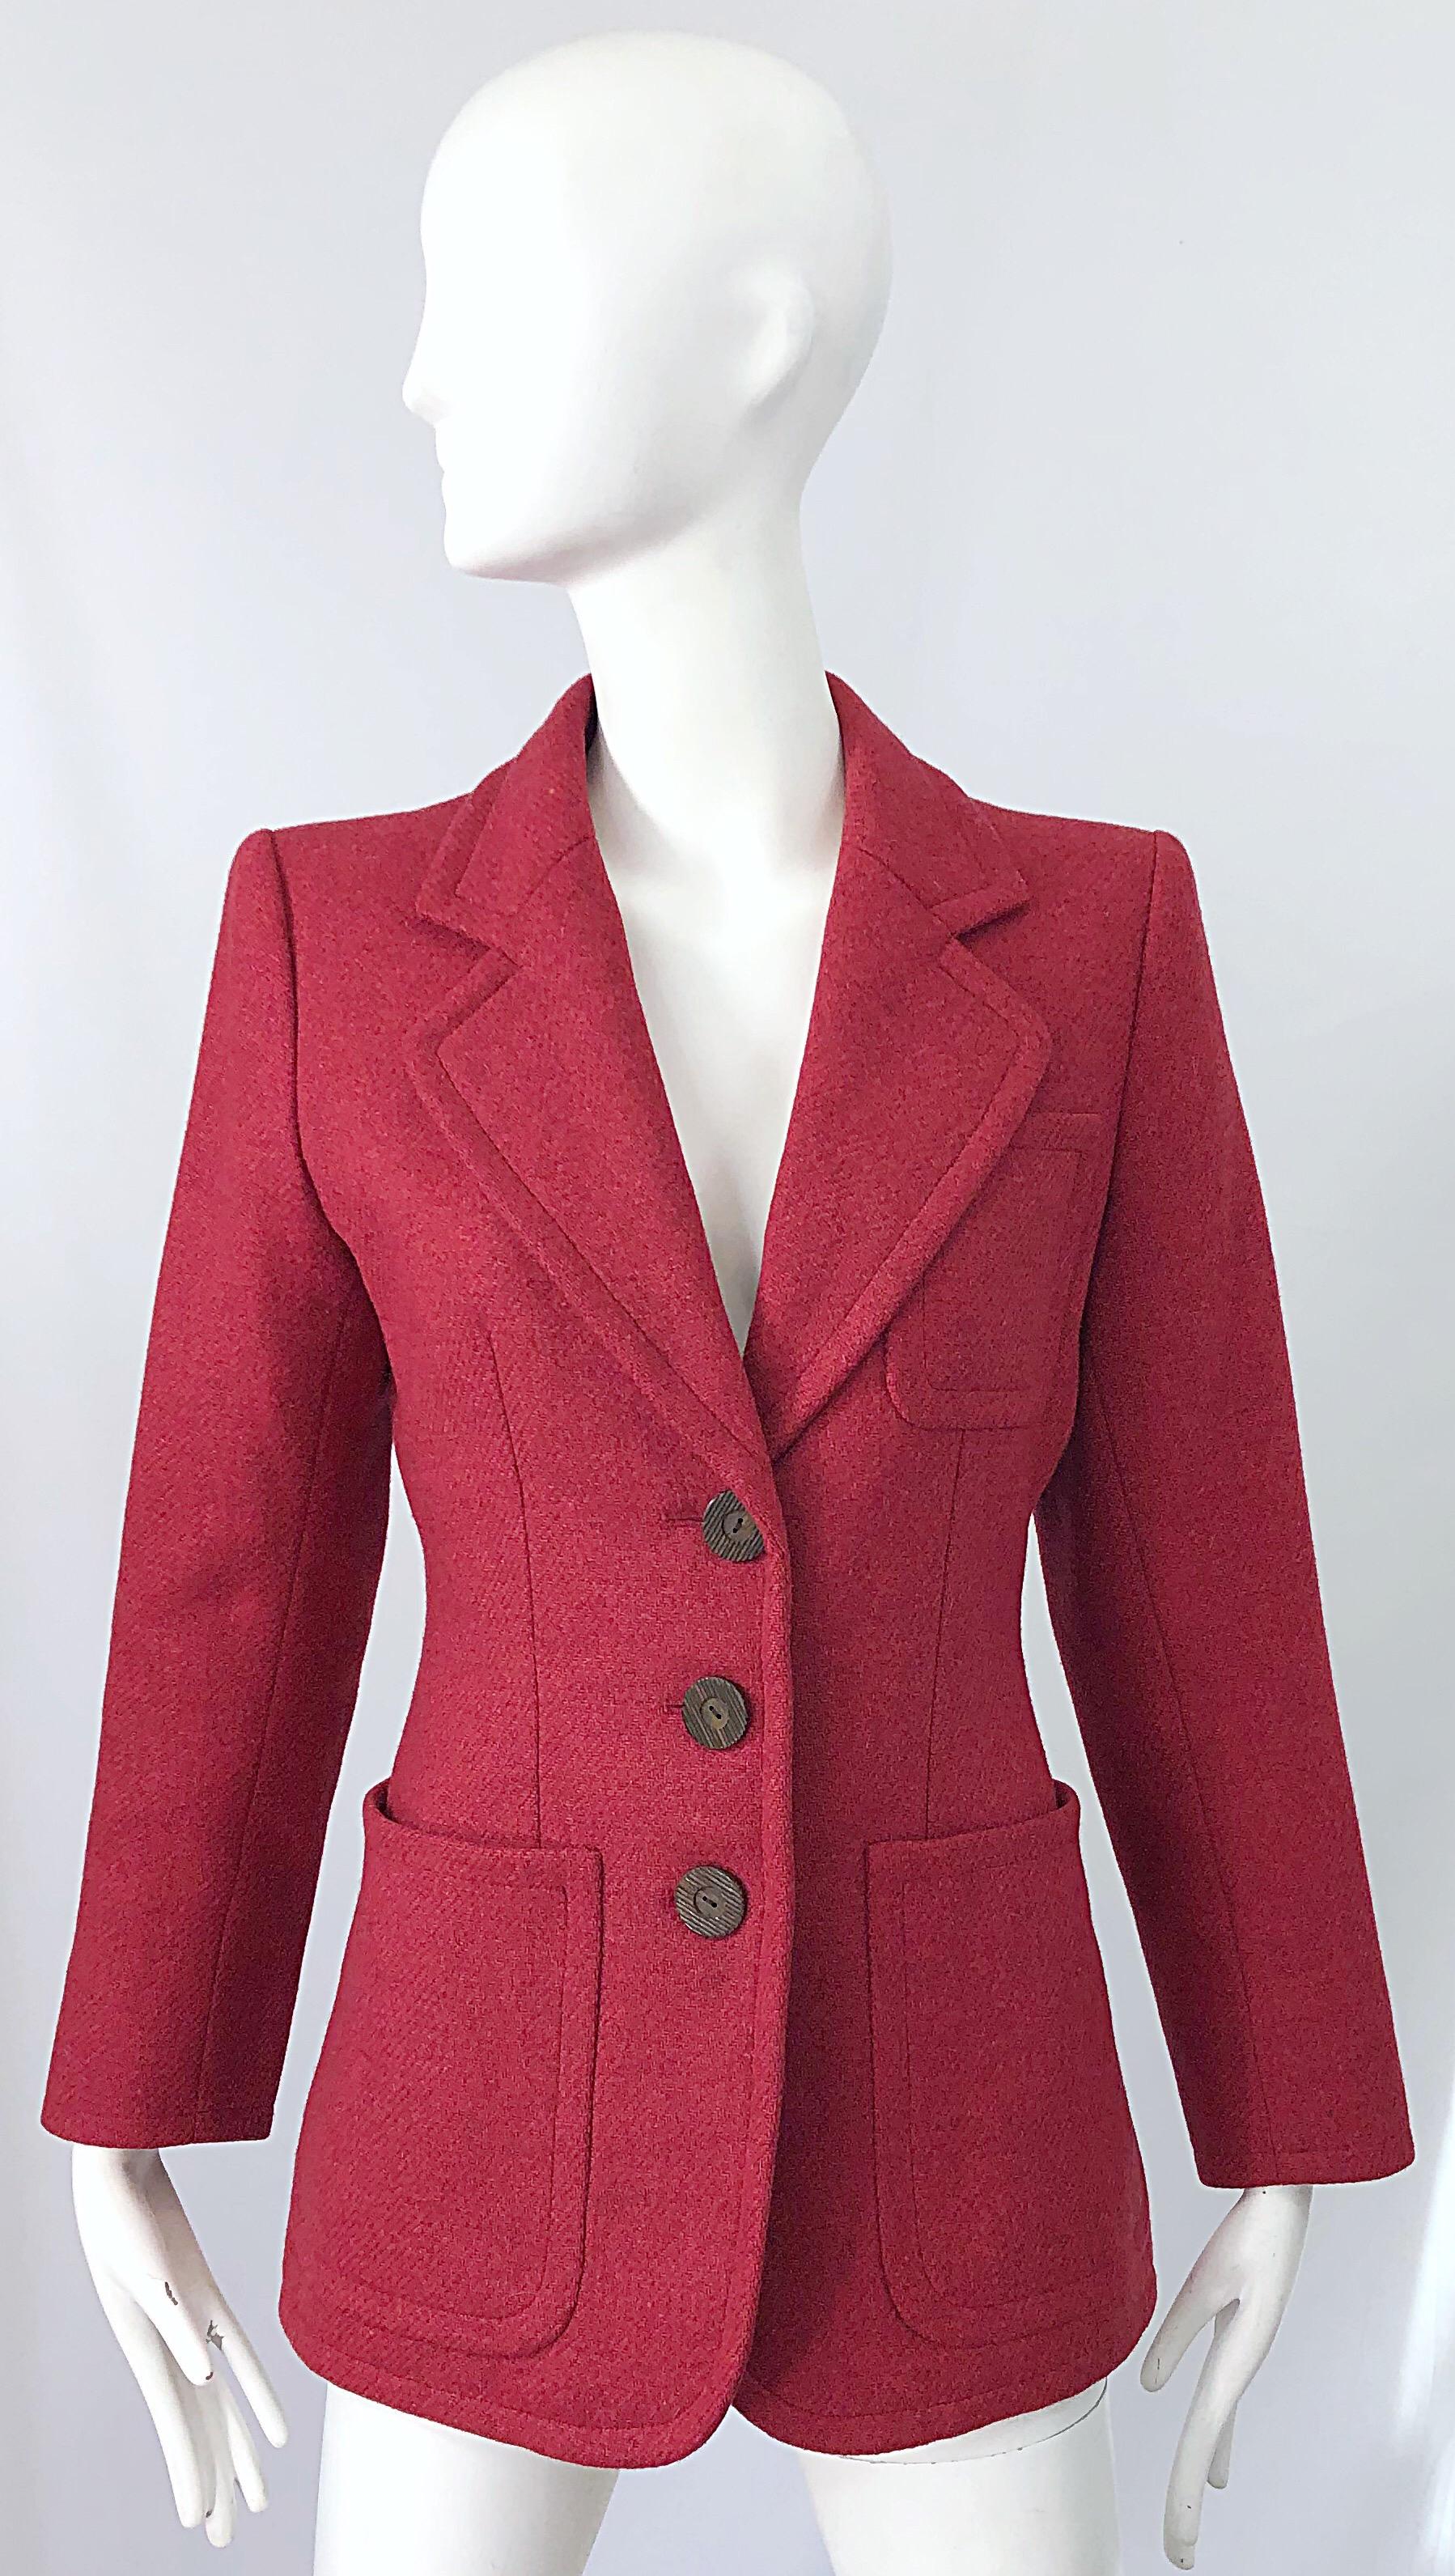 Stylish and timeless vintage 90s YVES SAINT LAURENT Rive Gauche raspberry pink tailored blazer jacket ! Features the perfect pink color that is great anytime of year. Classic Saint Laurent lapels that are reminiscent of his designs from the 70s.